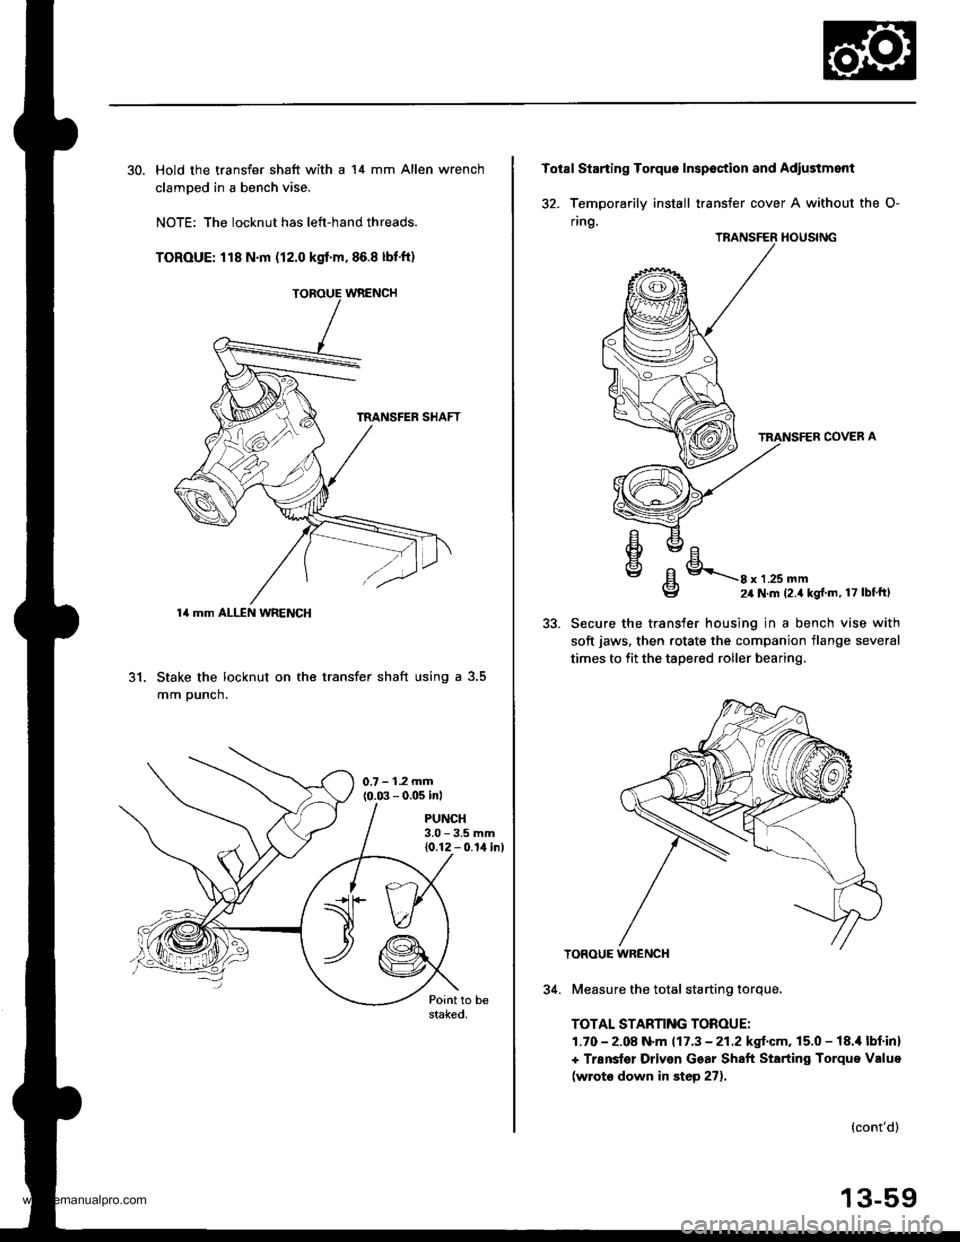 HONDA CR-V 1999 RD1-RD3 / 1.G User Guide 
30. Hold the transfer shaft with a 14 mm Allen wrench
clamDed in a bench vise.
NOTE: The locknut has left-hand threads.
TOROUE: 118 N.m (12.0 kgtm,86.8 lbfft)
31. Stake the locknut on the transfer 